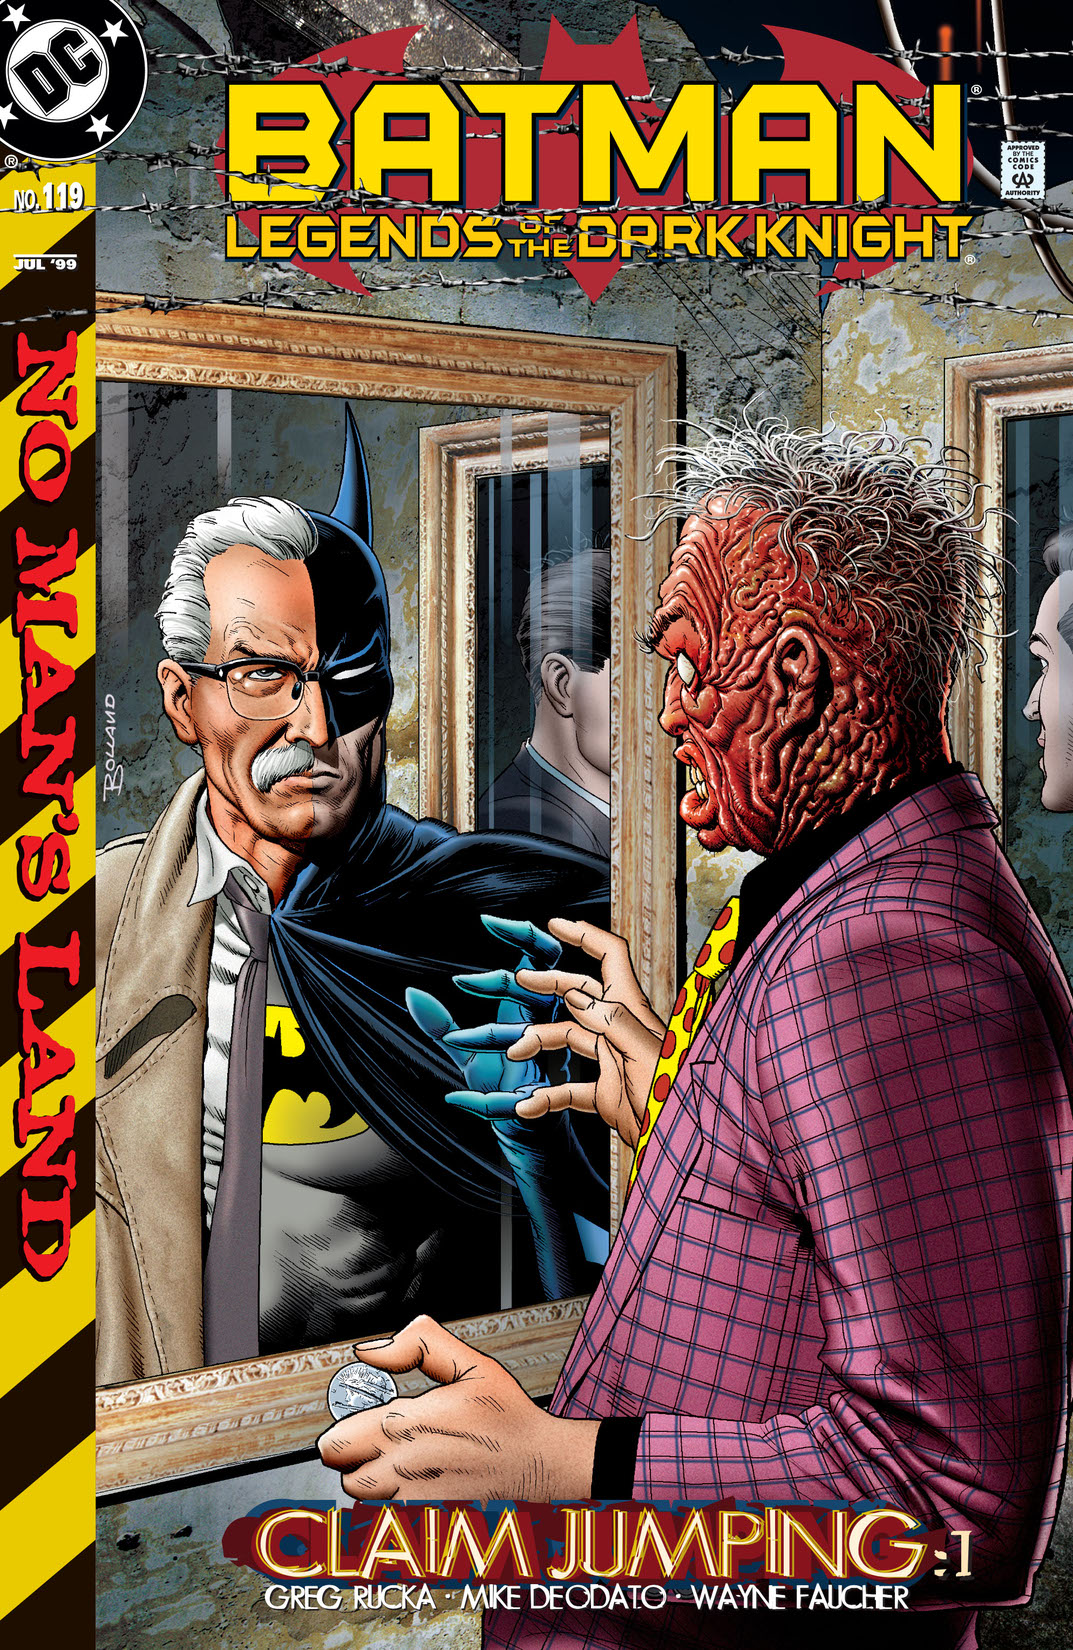 Batman: Legends of the Dark Knight #119 preview images